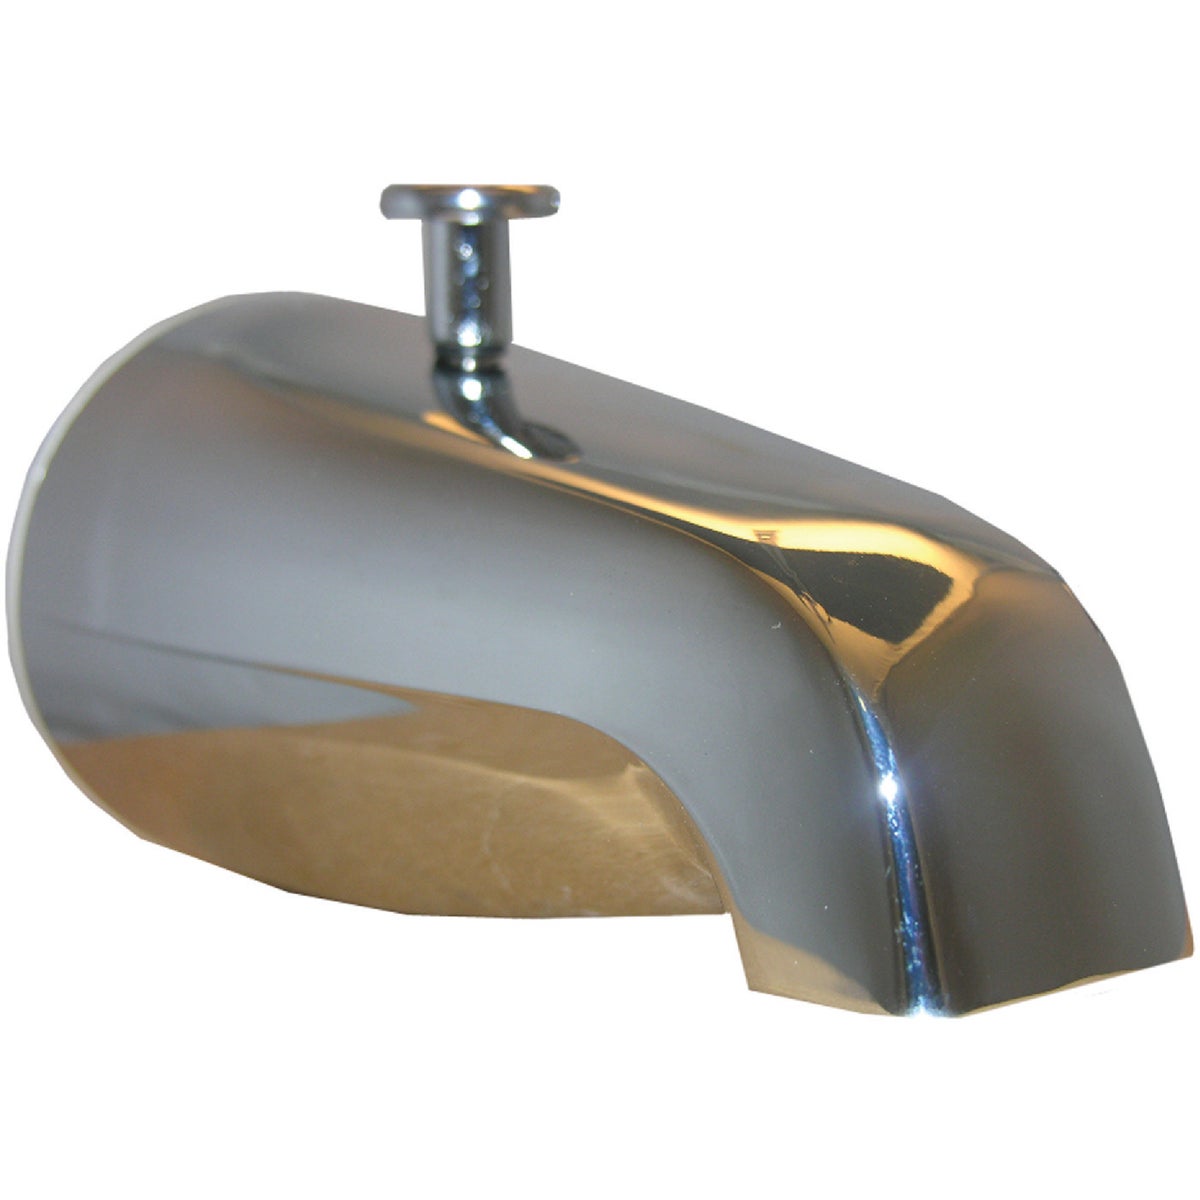 Lasco 1/2 In. or 3/4 In. Chrome Bathtub Spout with Diverter